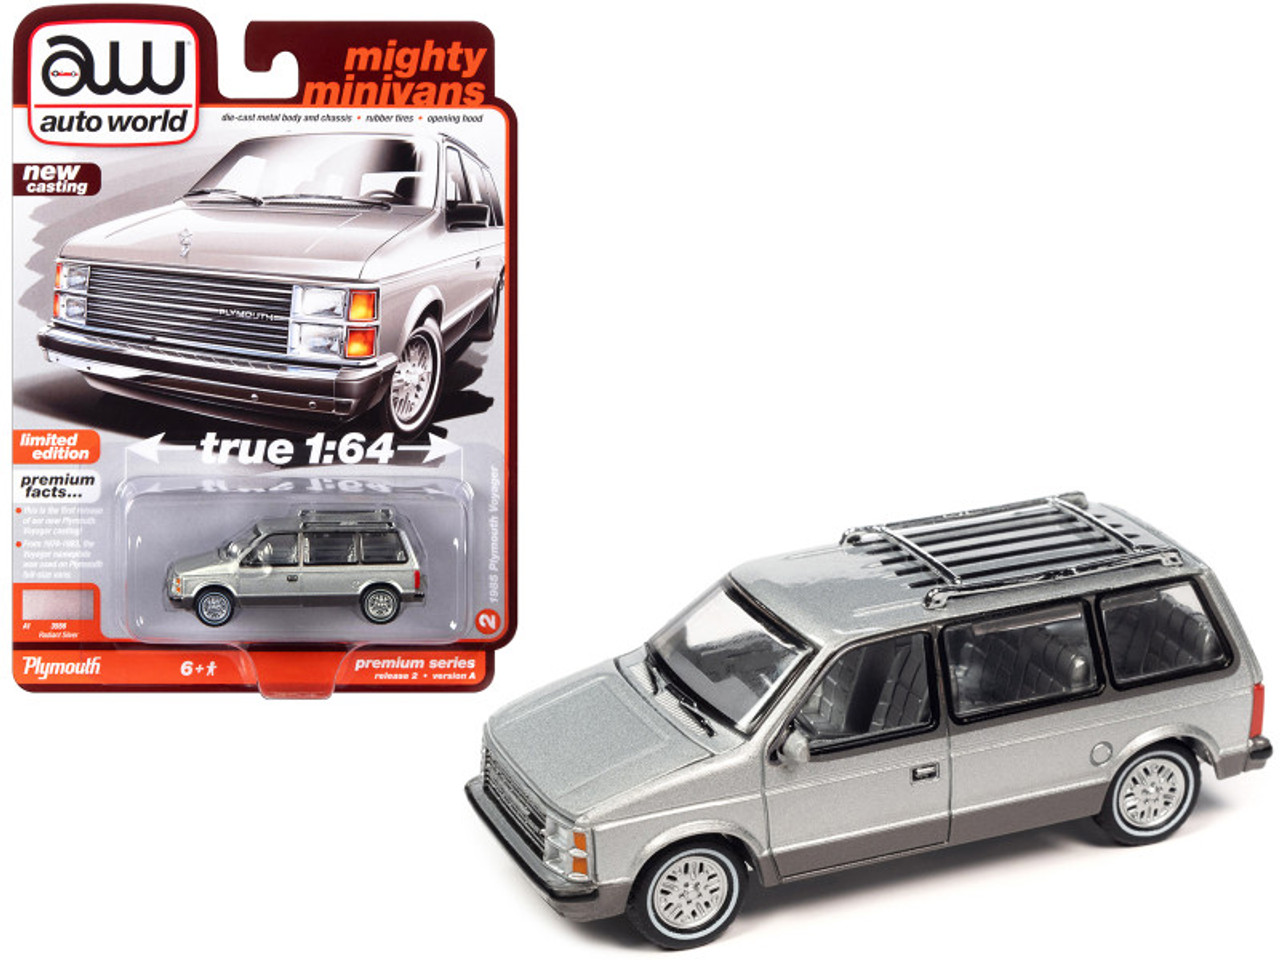 1985 Plymouth Voyager Minivan Radiant Silver Metallic with Roofrack "Mighty Minivans" Limited Edition 1/64 Diecast Model Car by Auto World